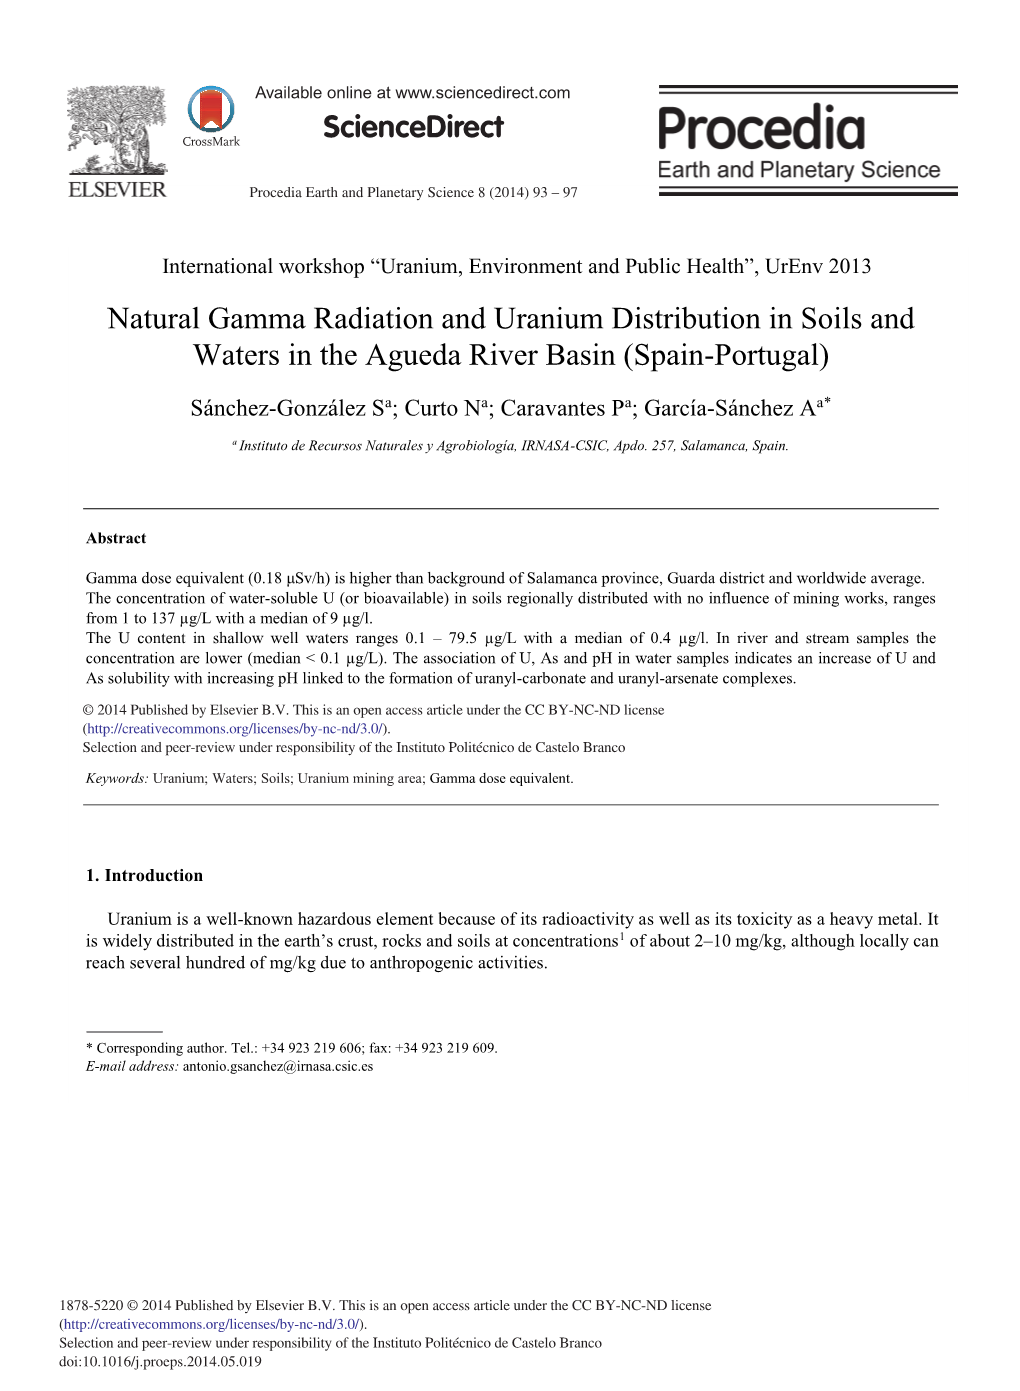 Natural Gamma Radiation and Uranium Distribution in Soils and Waters in the Agueda River Basin (Spain-Portugal)